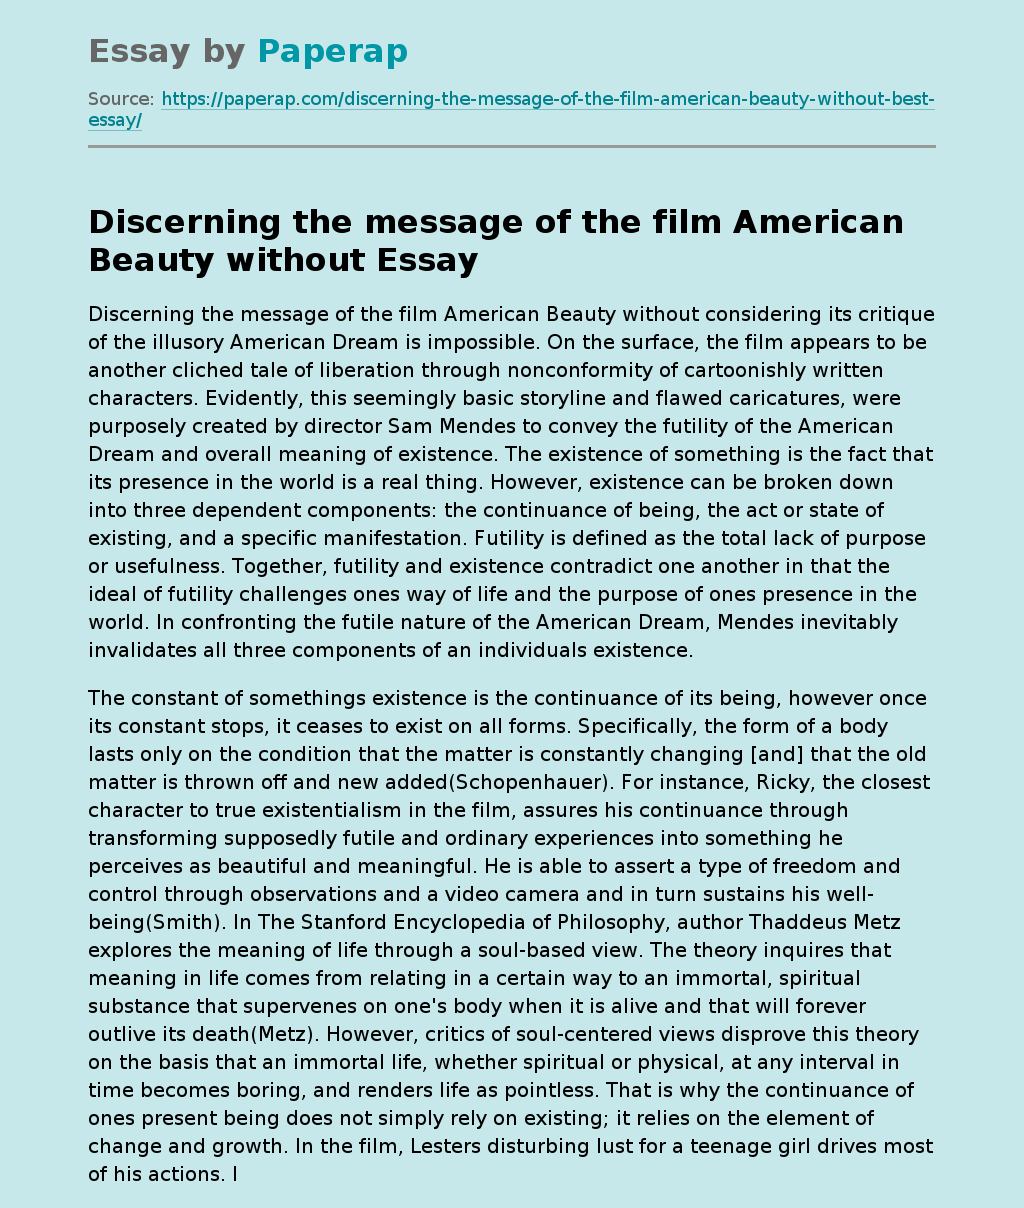 Discerning the message of the film American Beauty without best